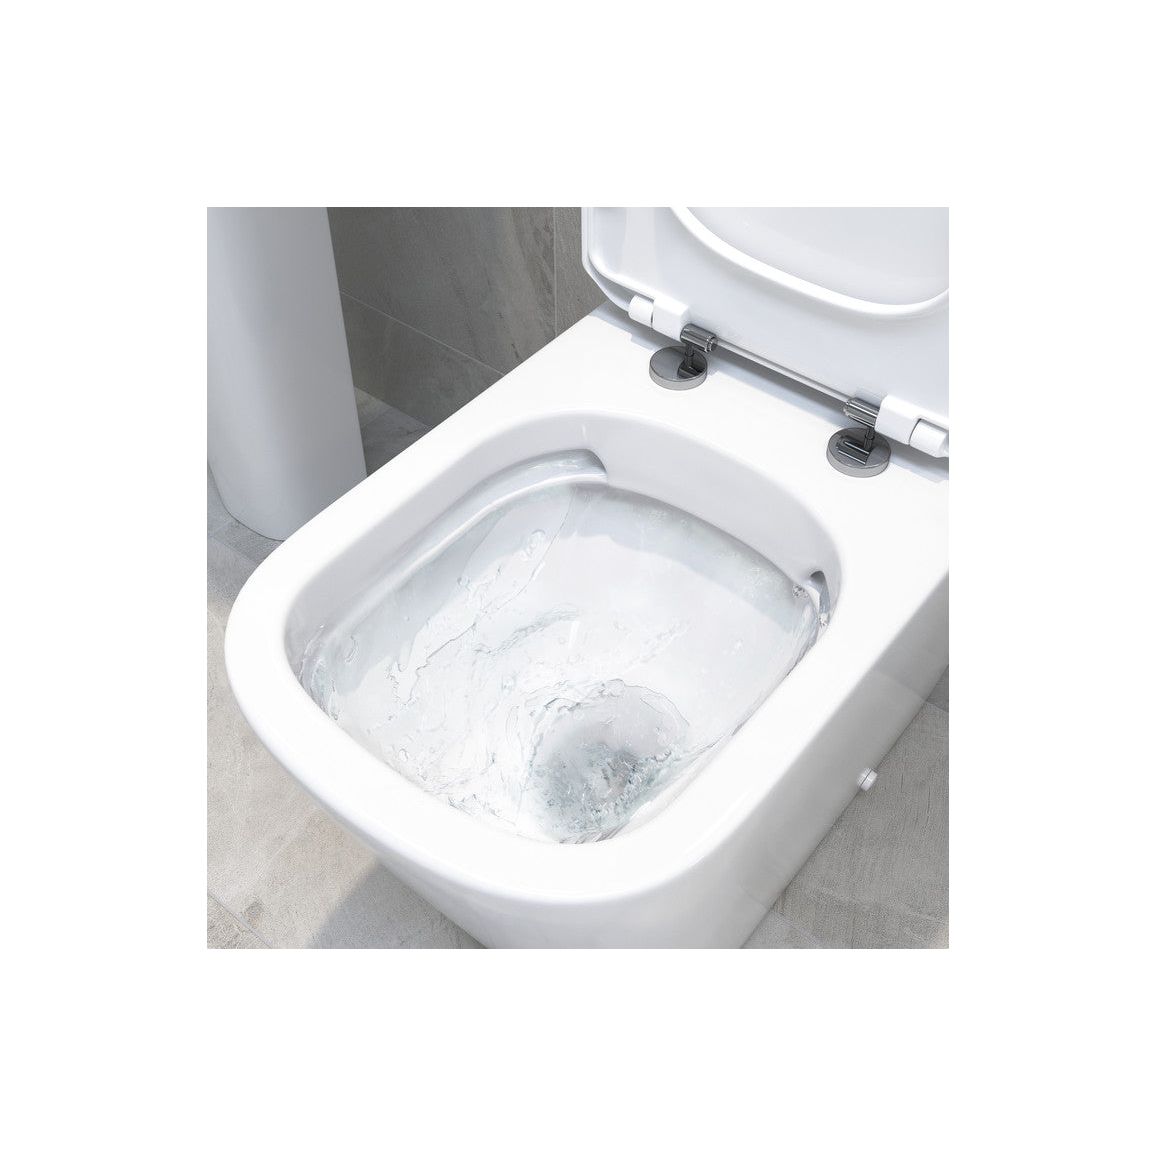 Henshaw Rimless Close Coupled Open Back Comfort Height WC & Soft Close Seat